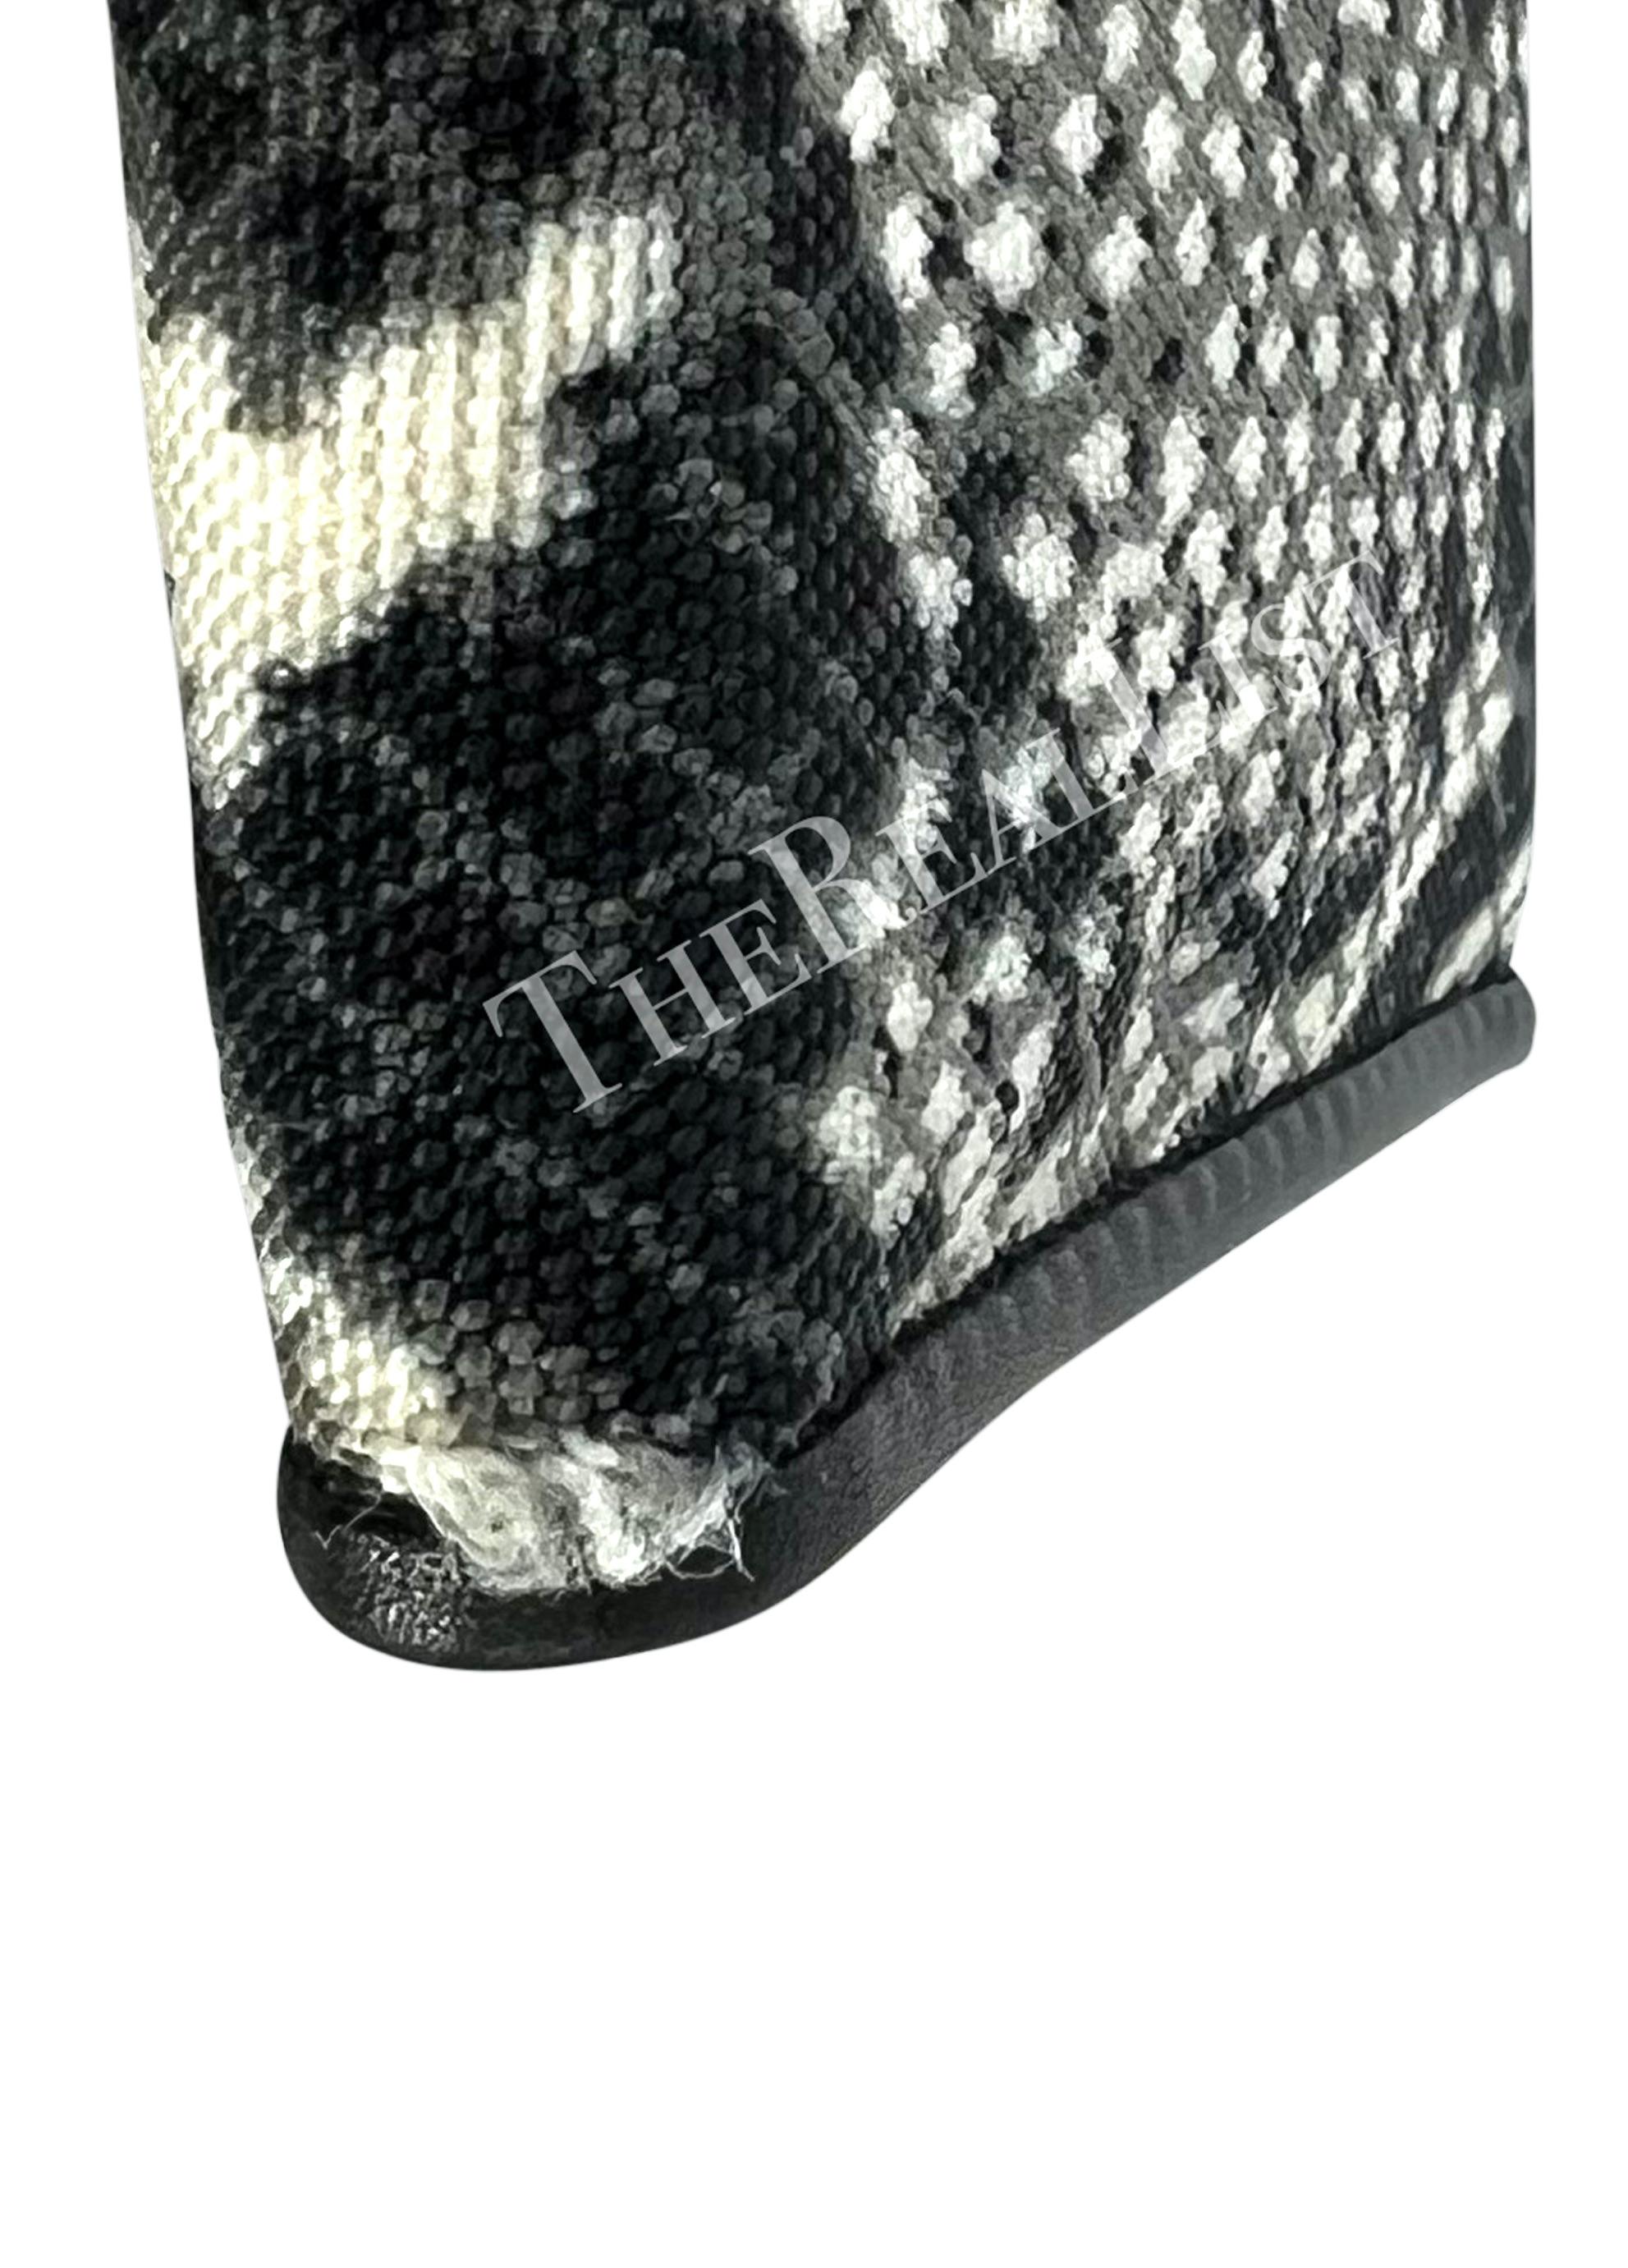 S/S 2000 Gucci by Tom Ford Grey Snake Print Condom Holder For Sale 1